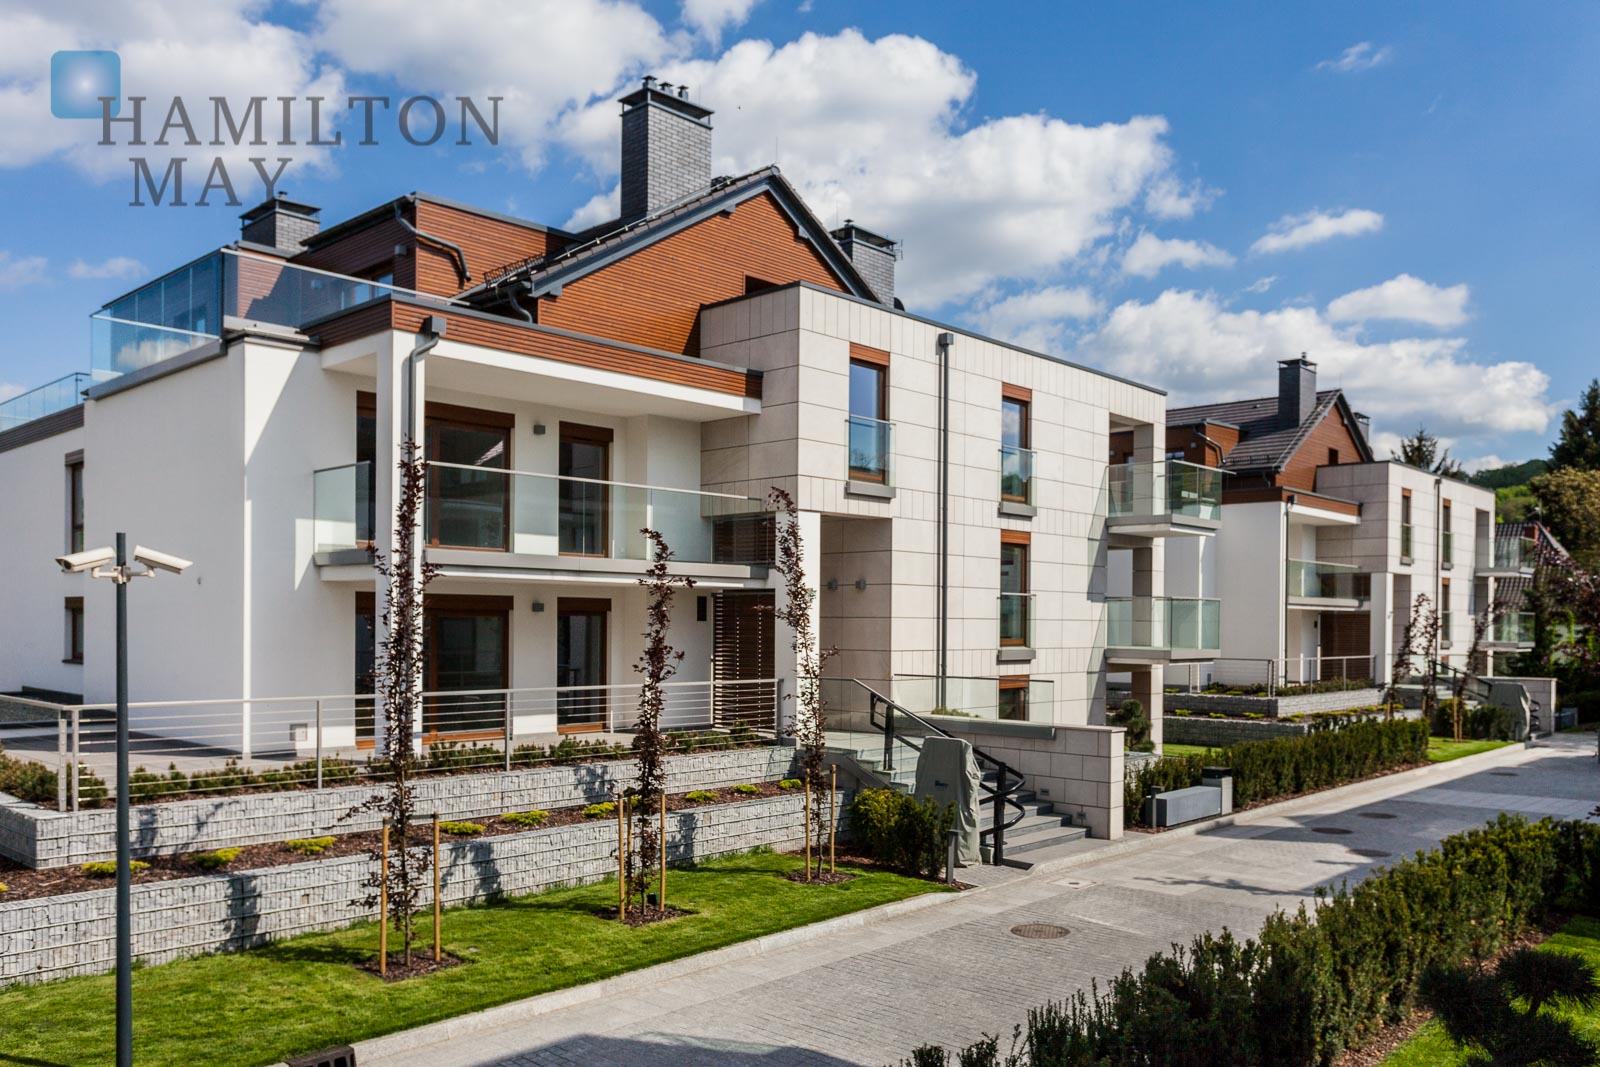 Hortus Apartments – a new and exclusive villa style development in the heart of Wola Justowska.